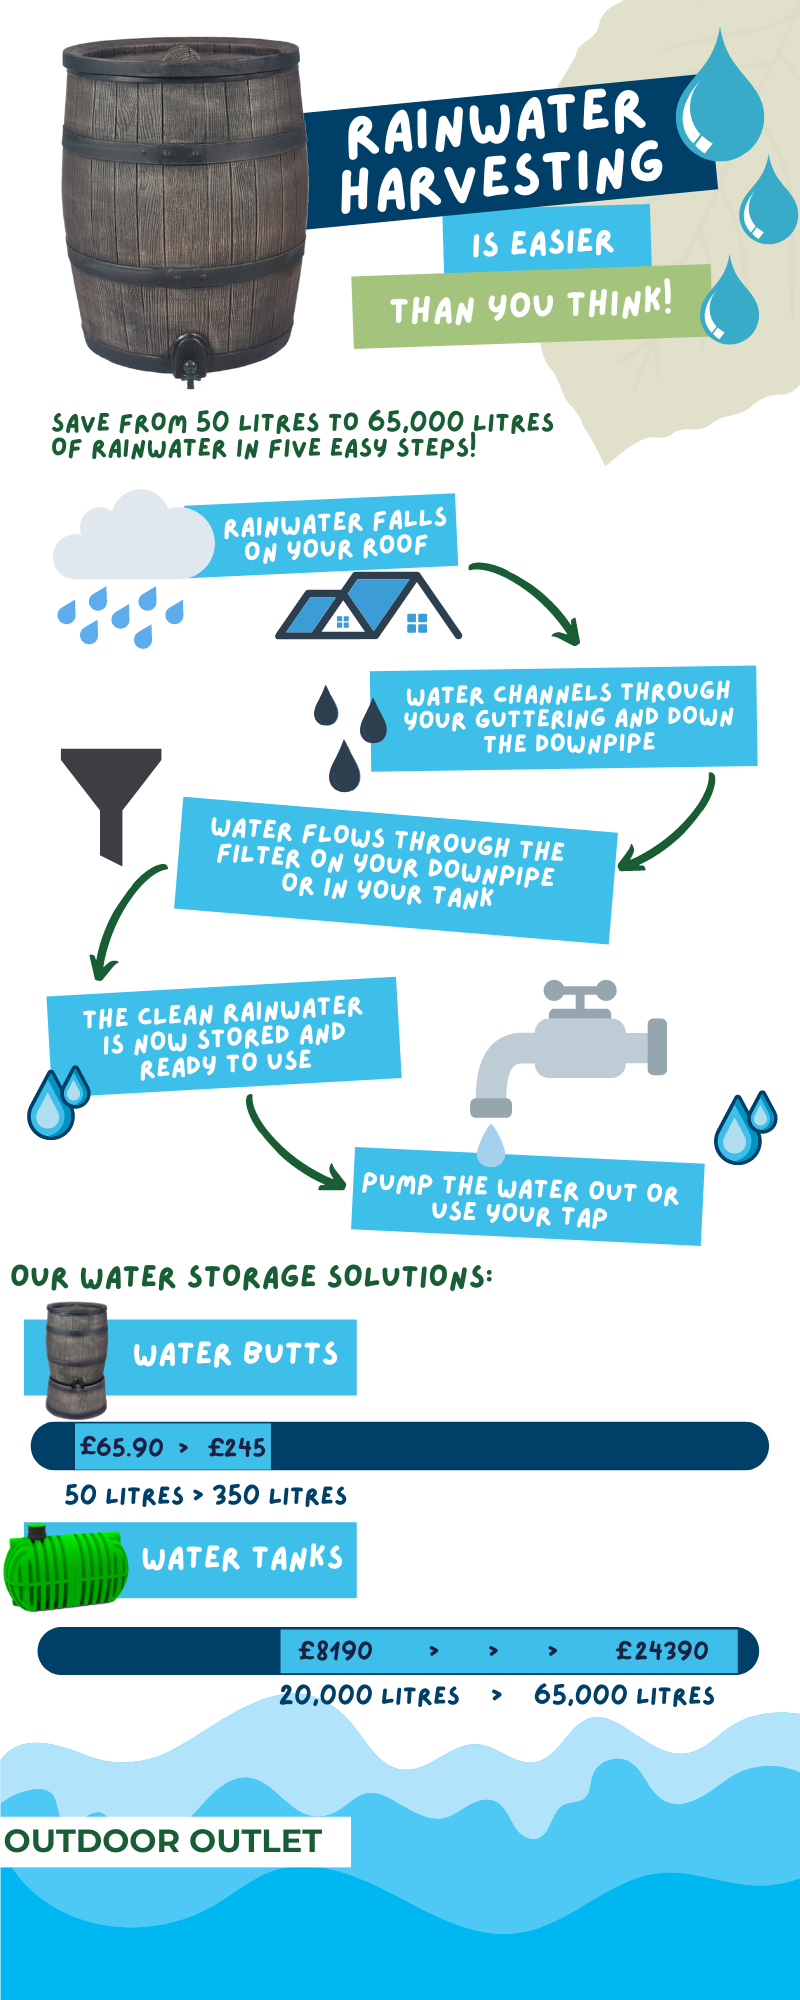 Outdoor Outlet Rainwater Harvesting Infographic